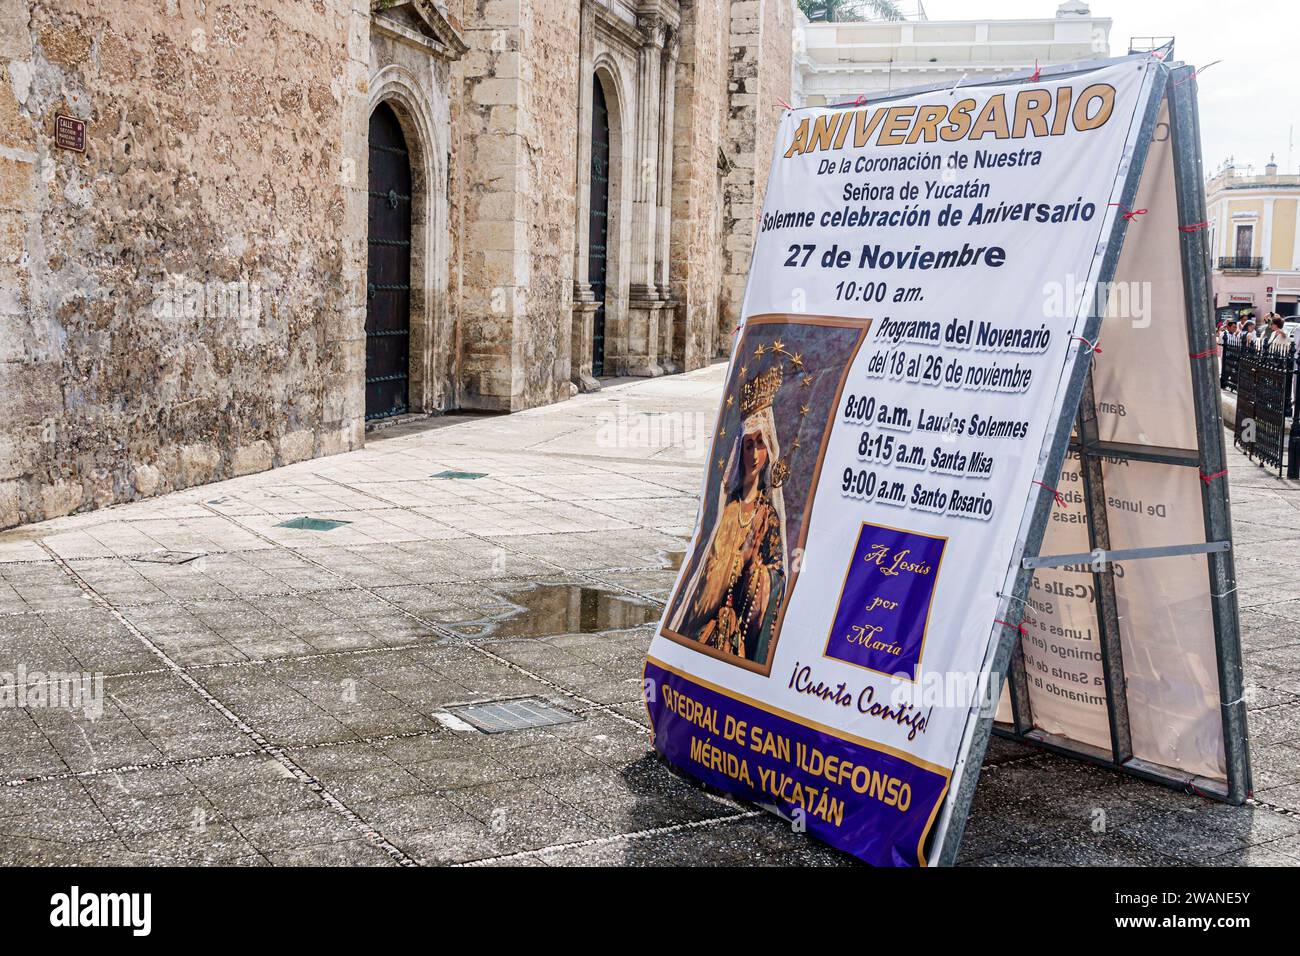 Merida Mexico,centro historico central historic district,religious event celebration,sign information,promoting promotion,advertising billboard banner Stock Photo